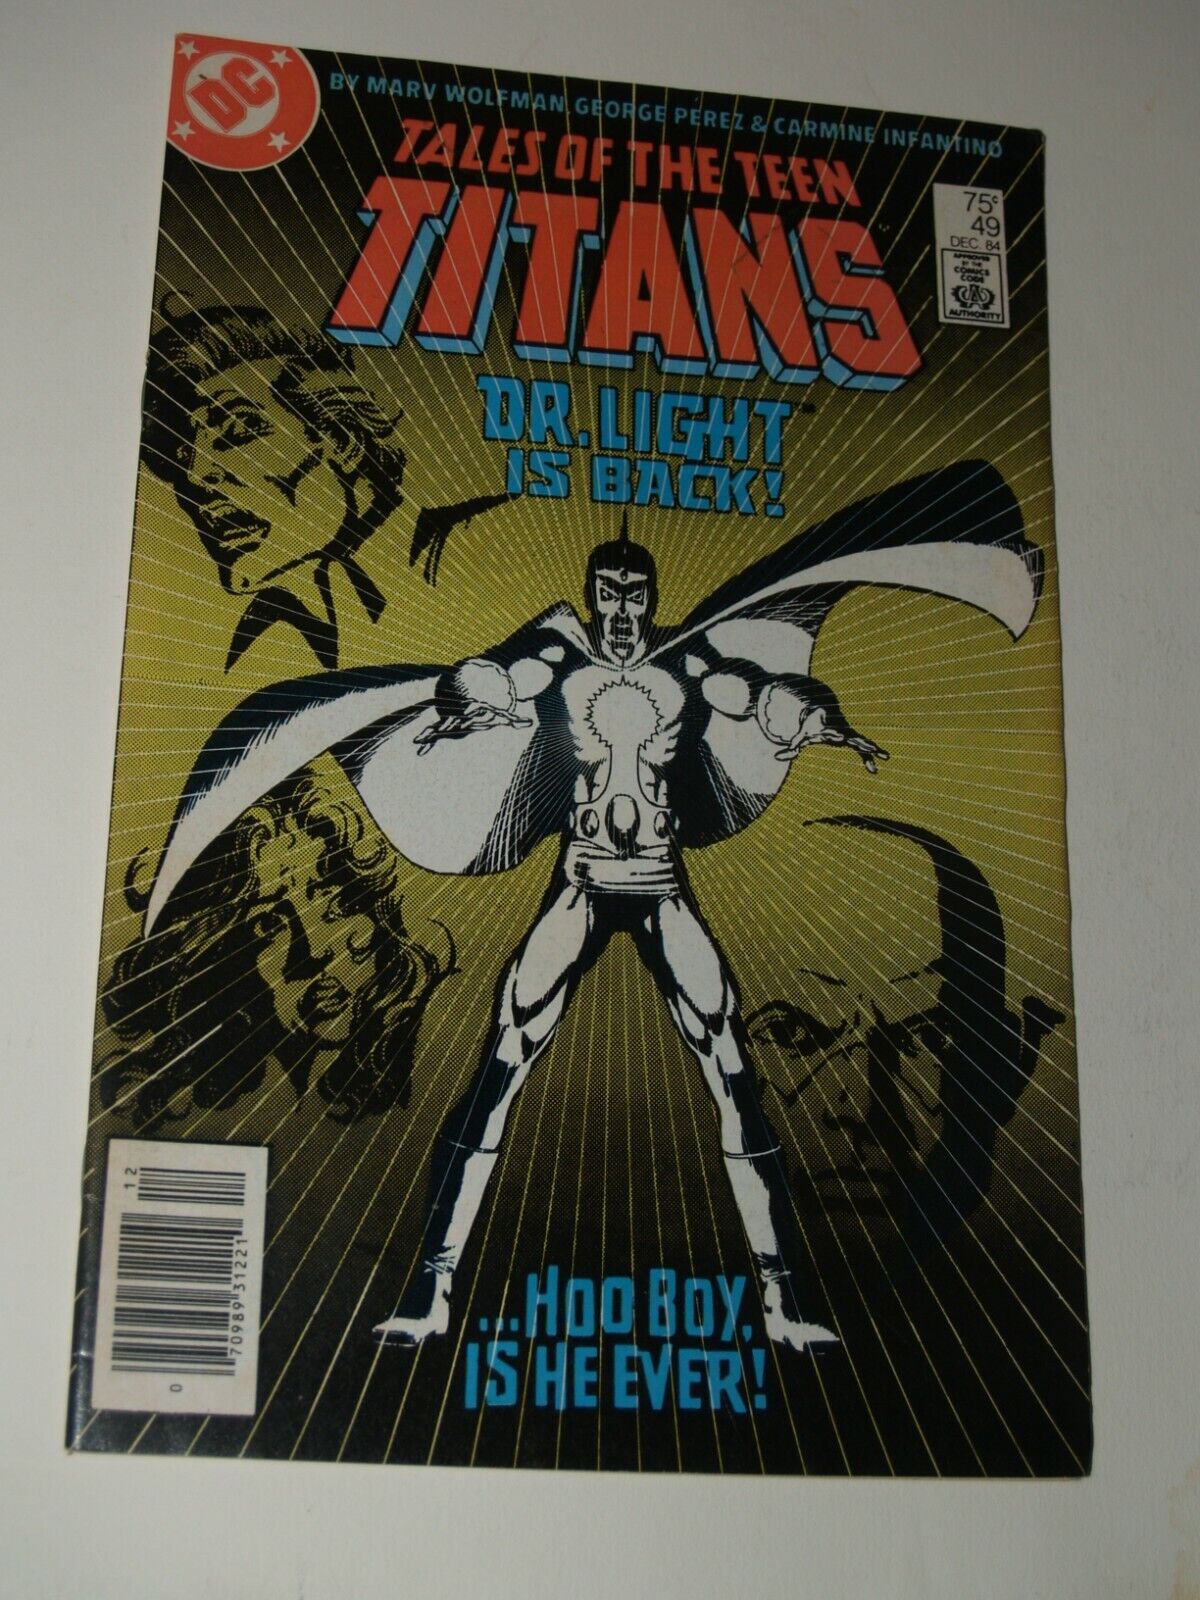 Tales of the Teen Titans #49 (1984) - DC Comics DR. LIGHT & FLASH APPEARANCE